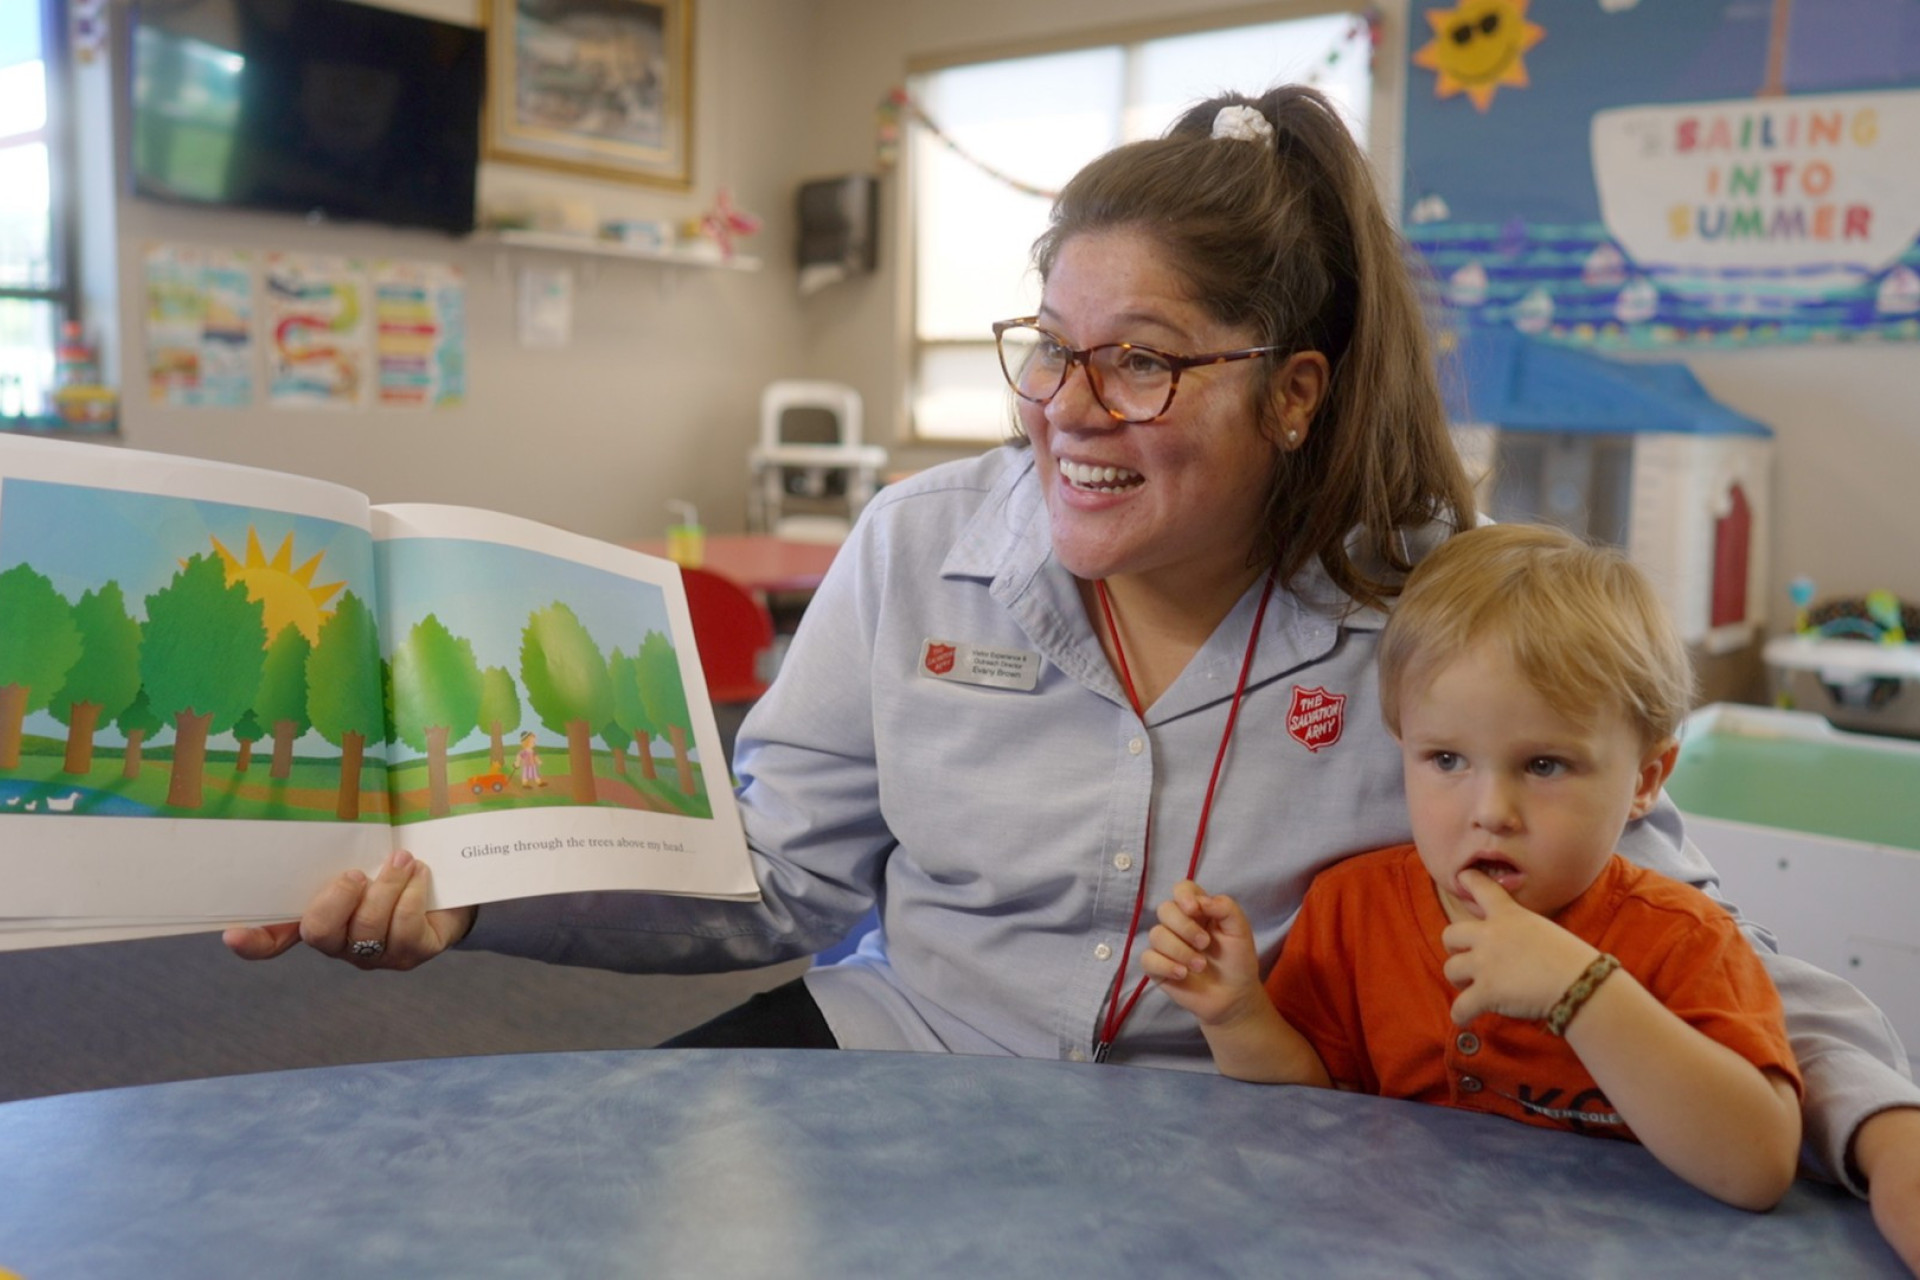 Salvation Army volunteer reading a book to kids